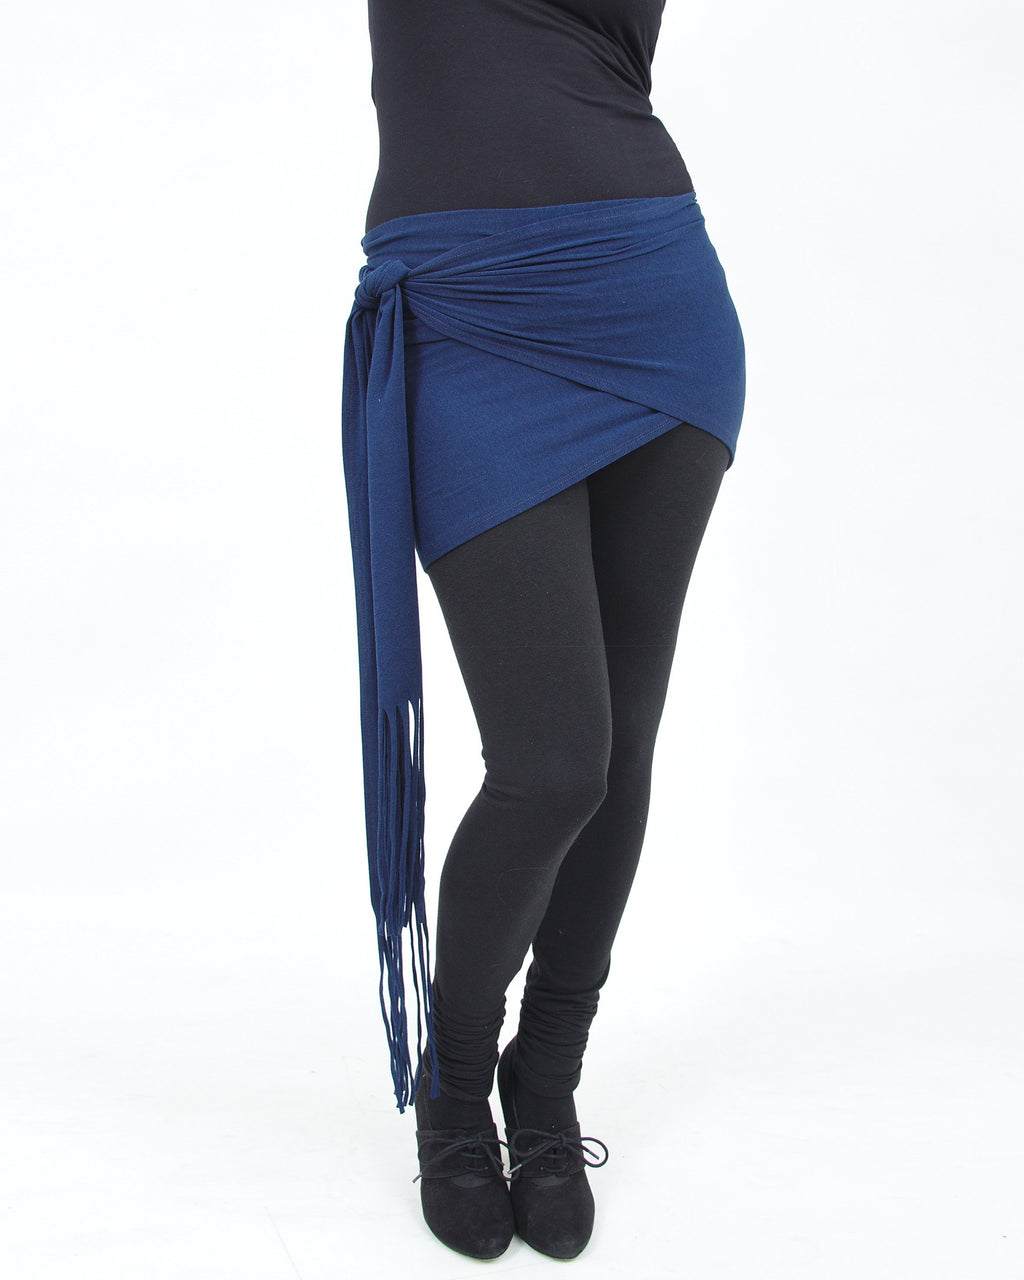 Everyday Double Wrap - Navy Blue - By Dreaming Amelia and Rachel Brice